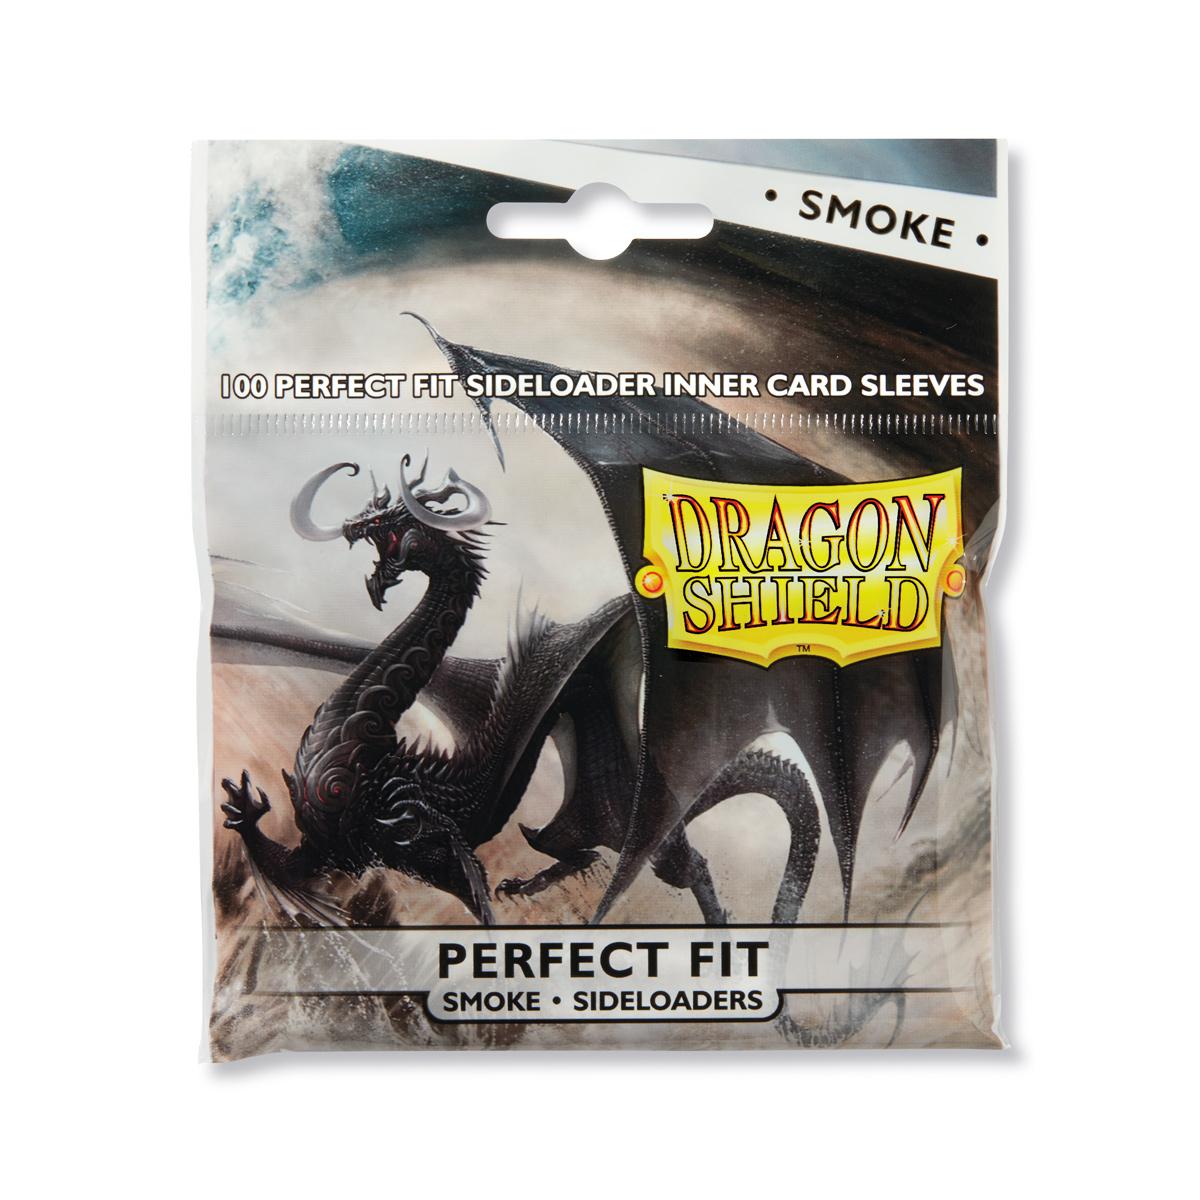 Dragon Shield - Perfect Fit  - Smoke Sideloaders - Standard Size (100 Sleeves)